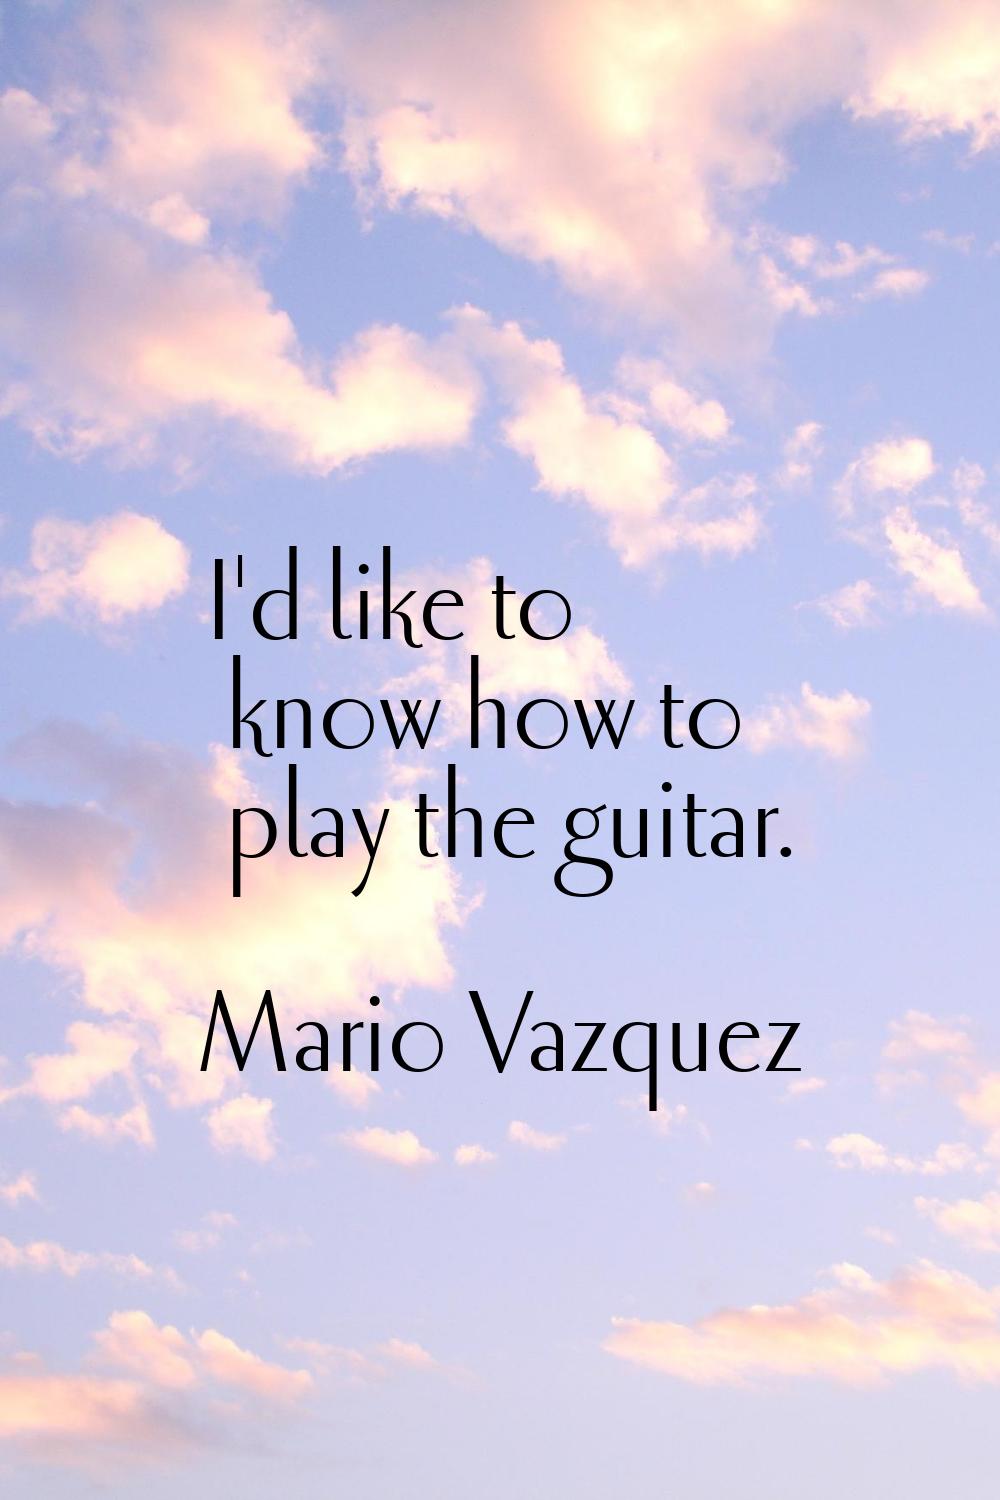 I'd like to know how to play the guitar.